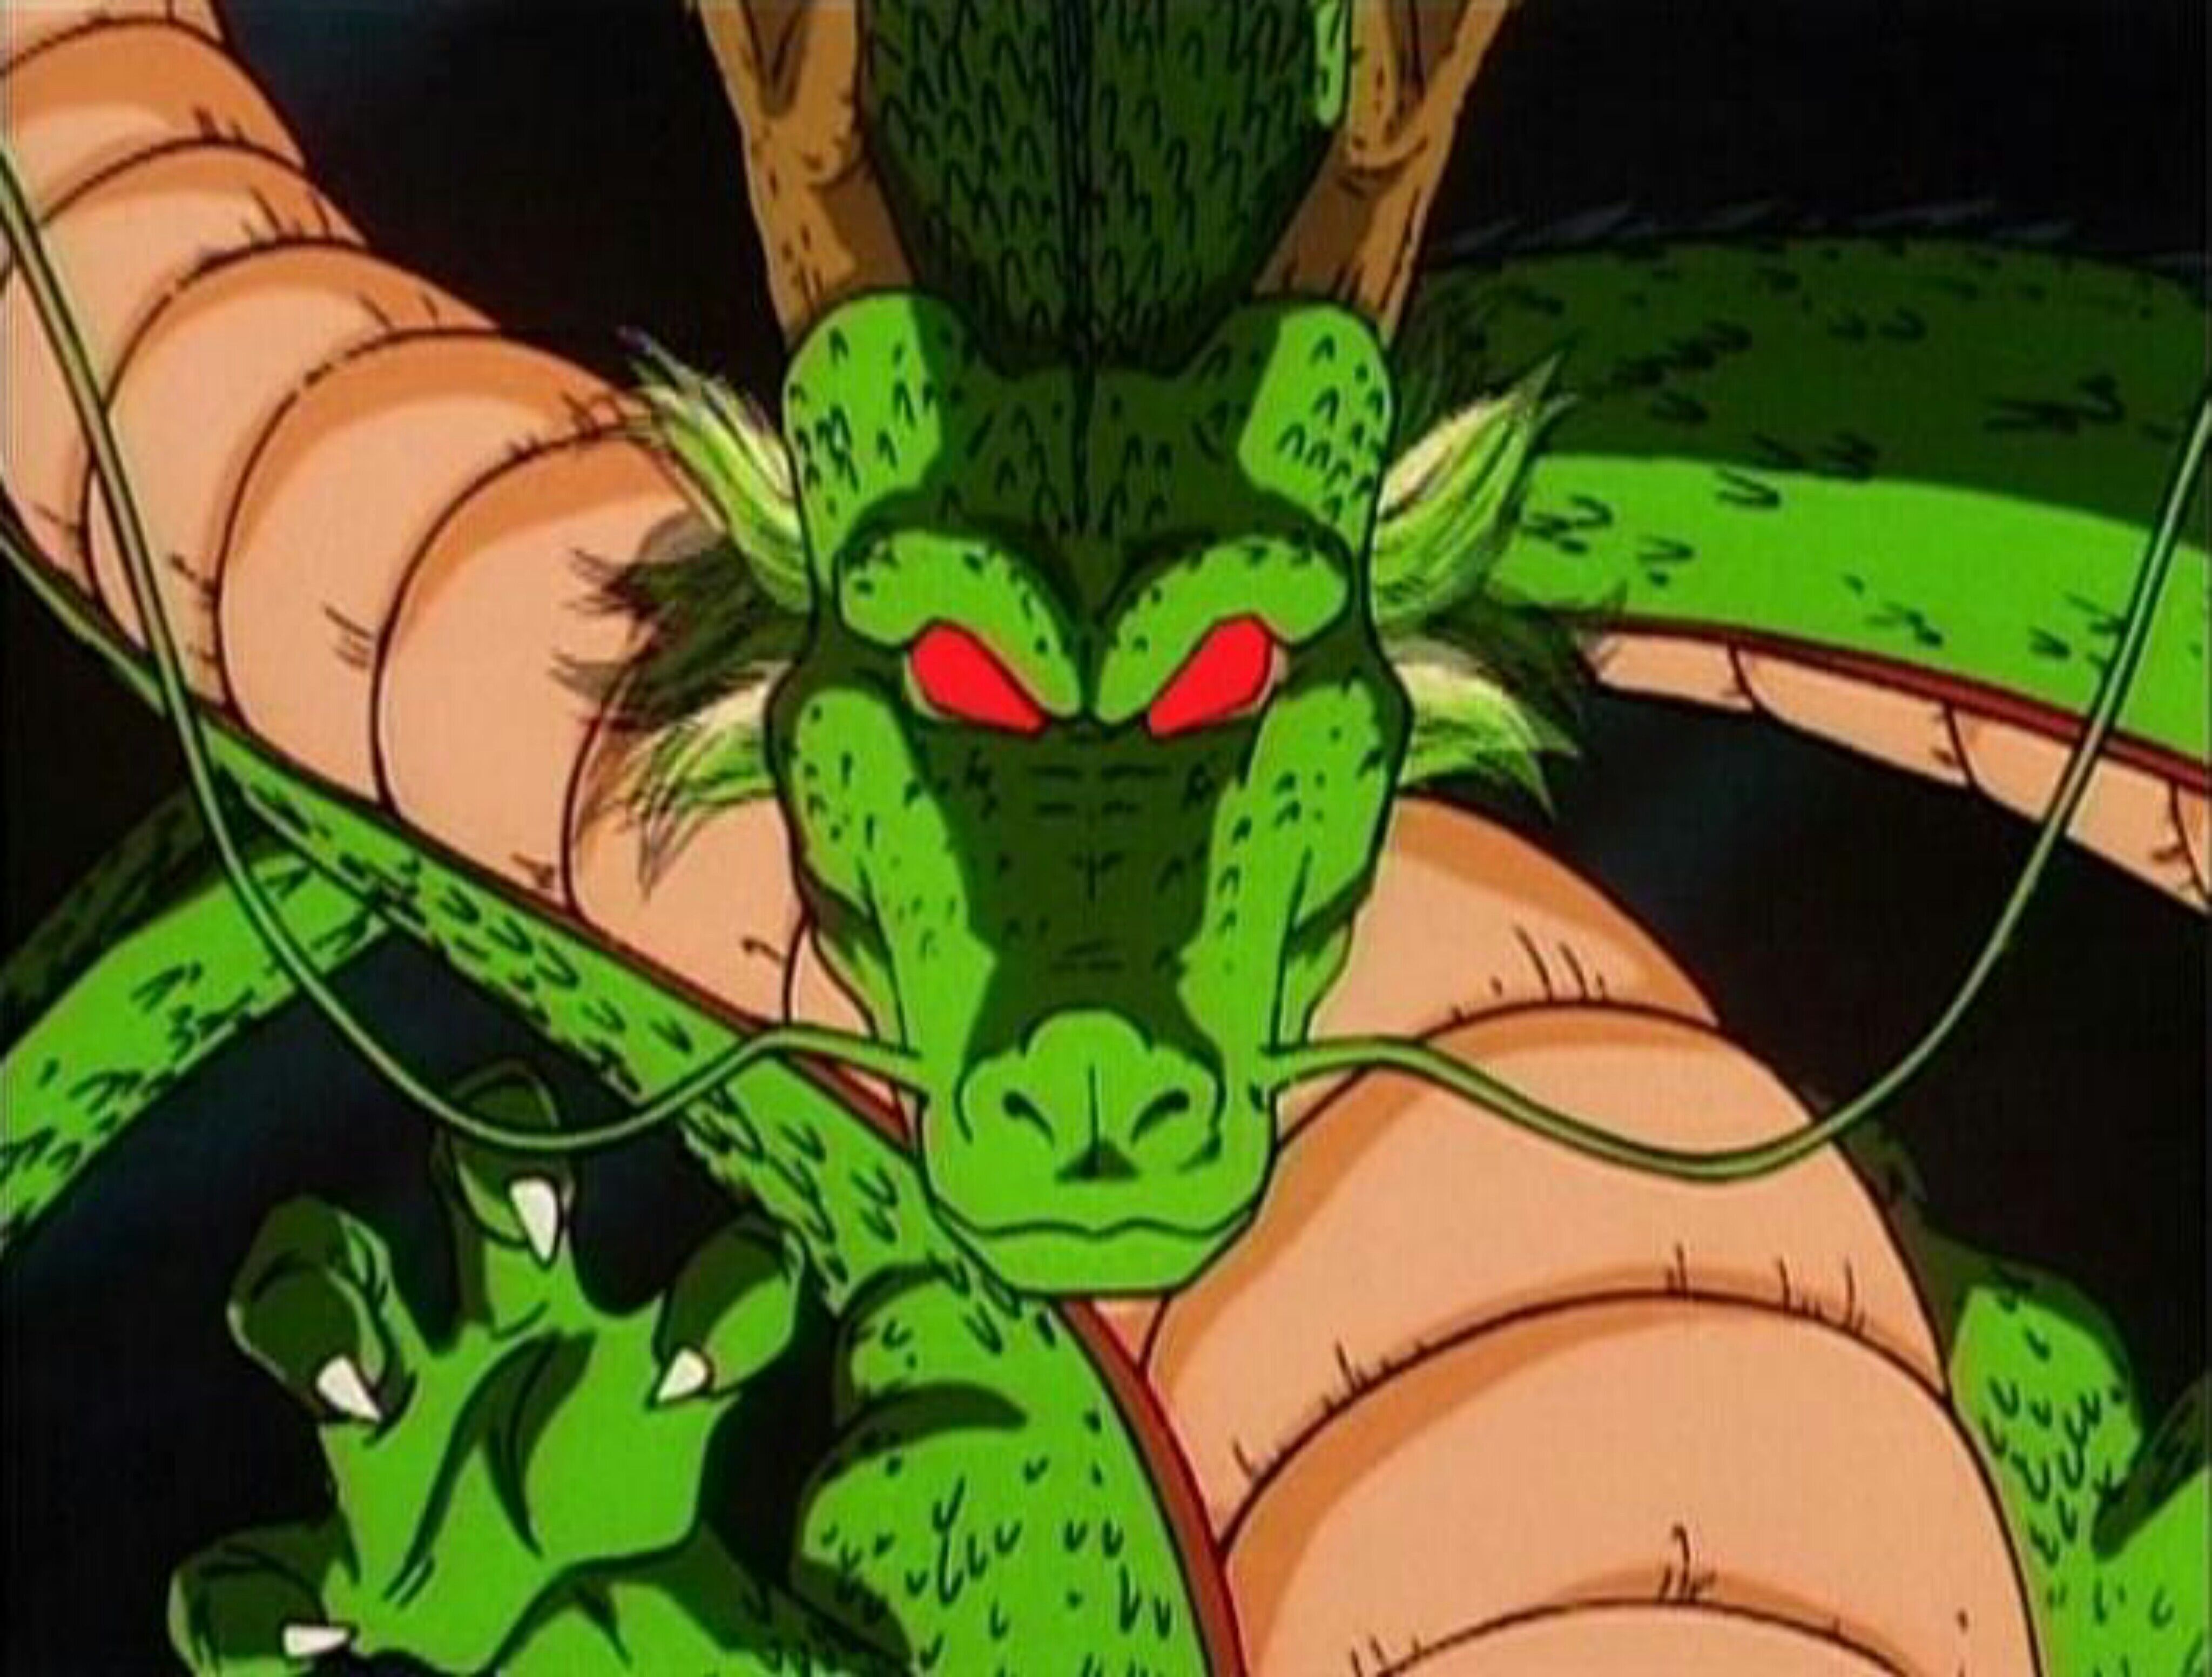 Shenron wish with Fires of Mt Frypan covering it. Thought it